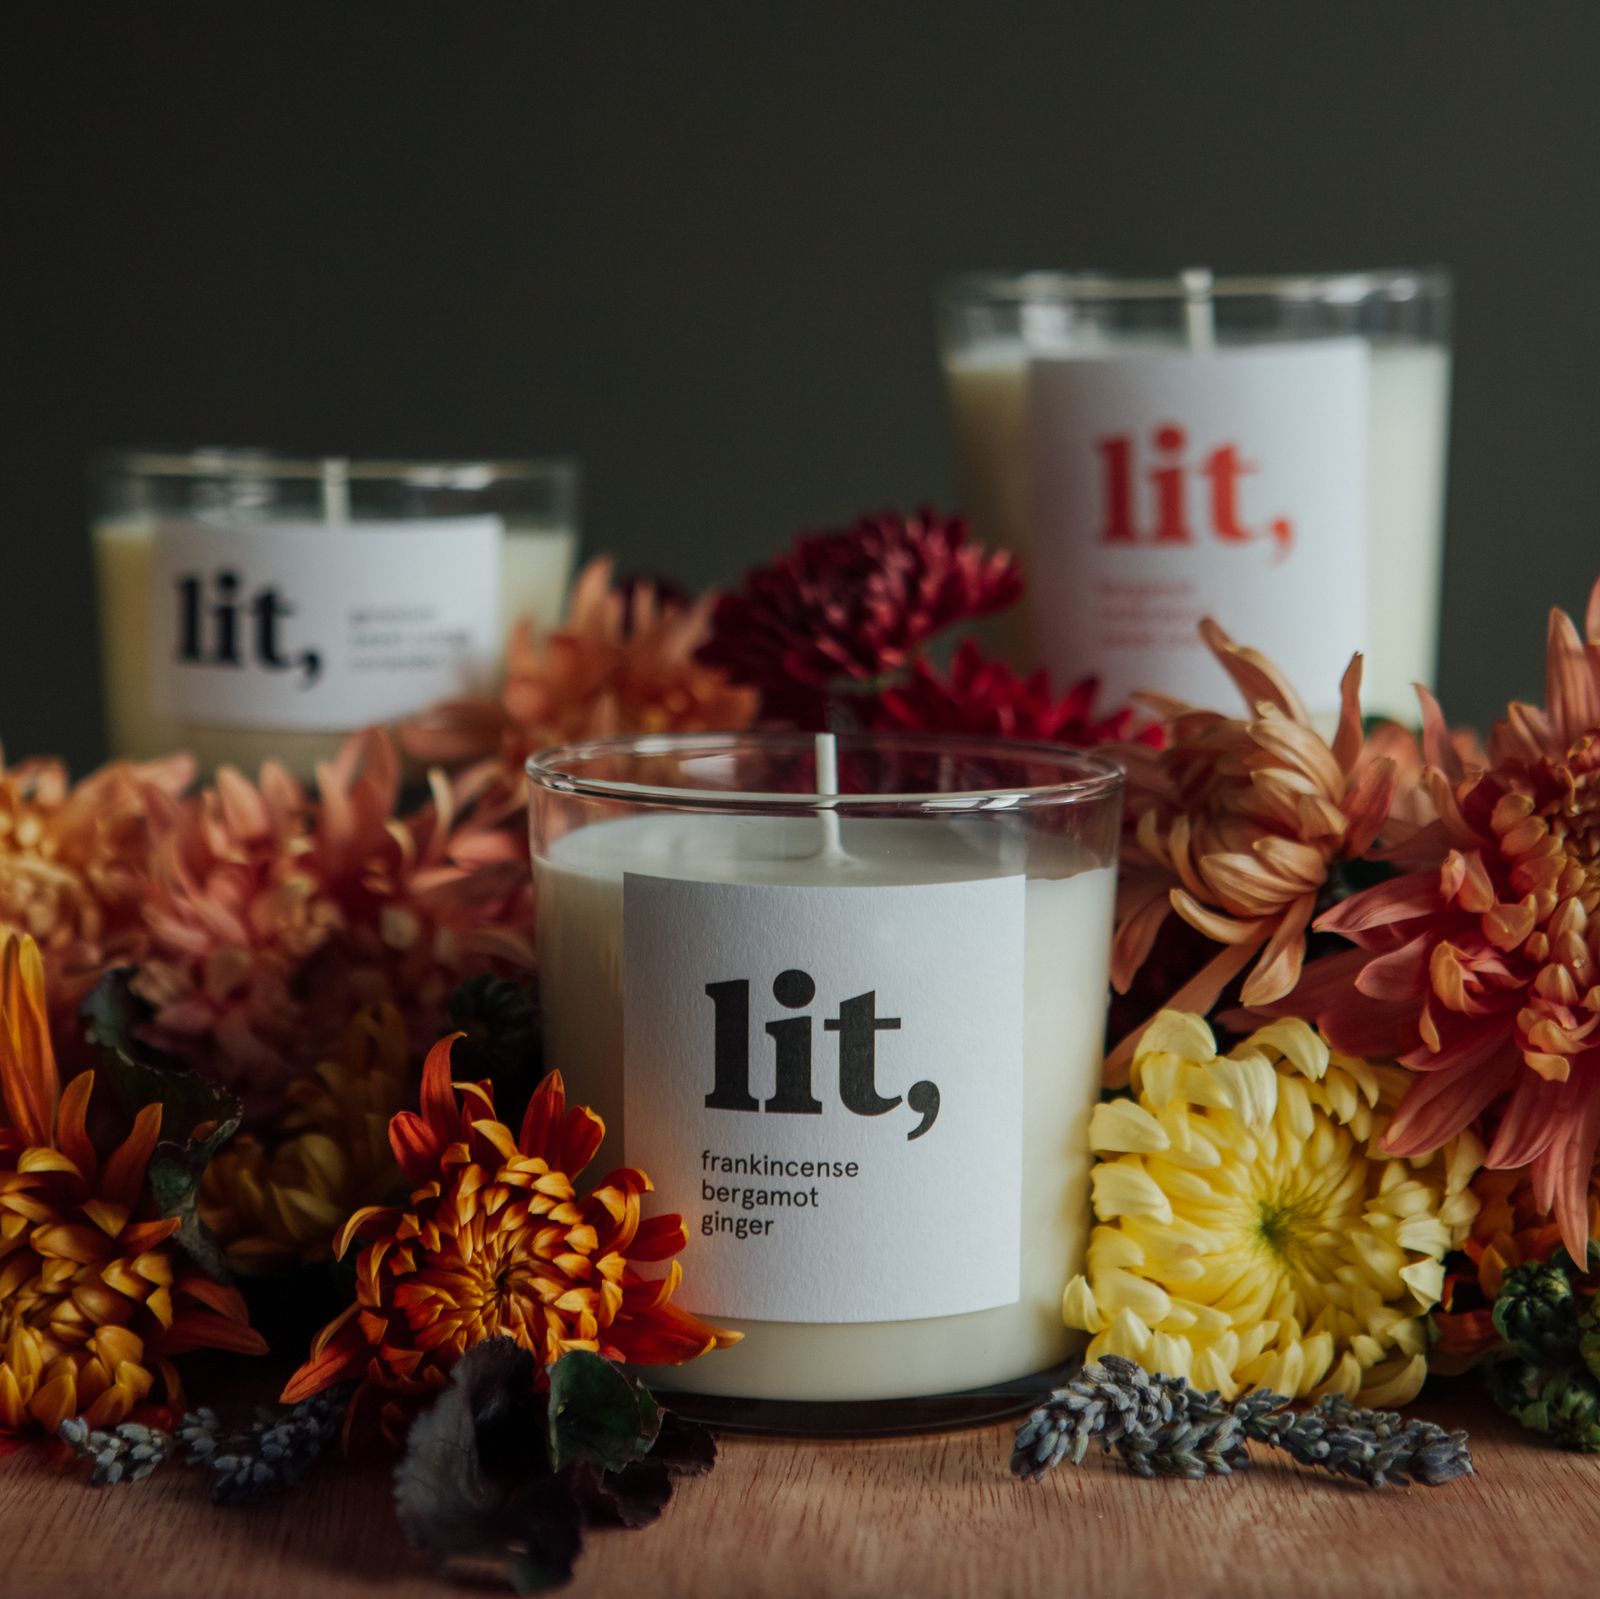 A photograph of the Lit Homeware candles.